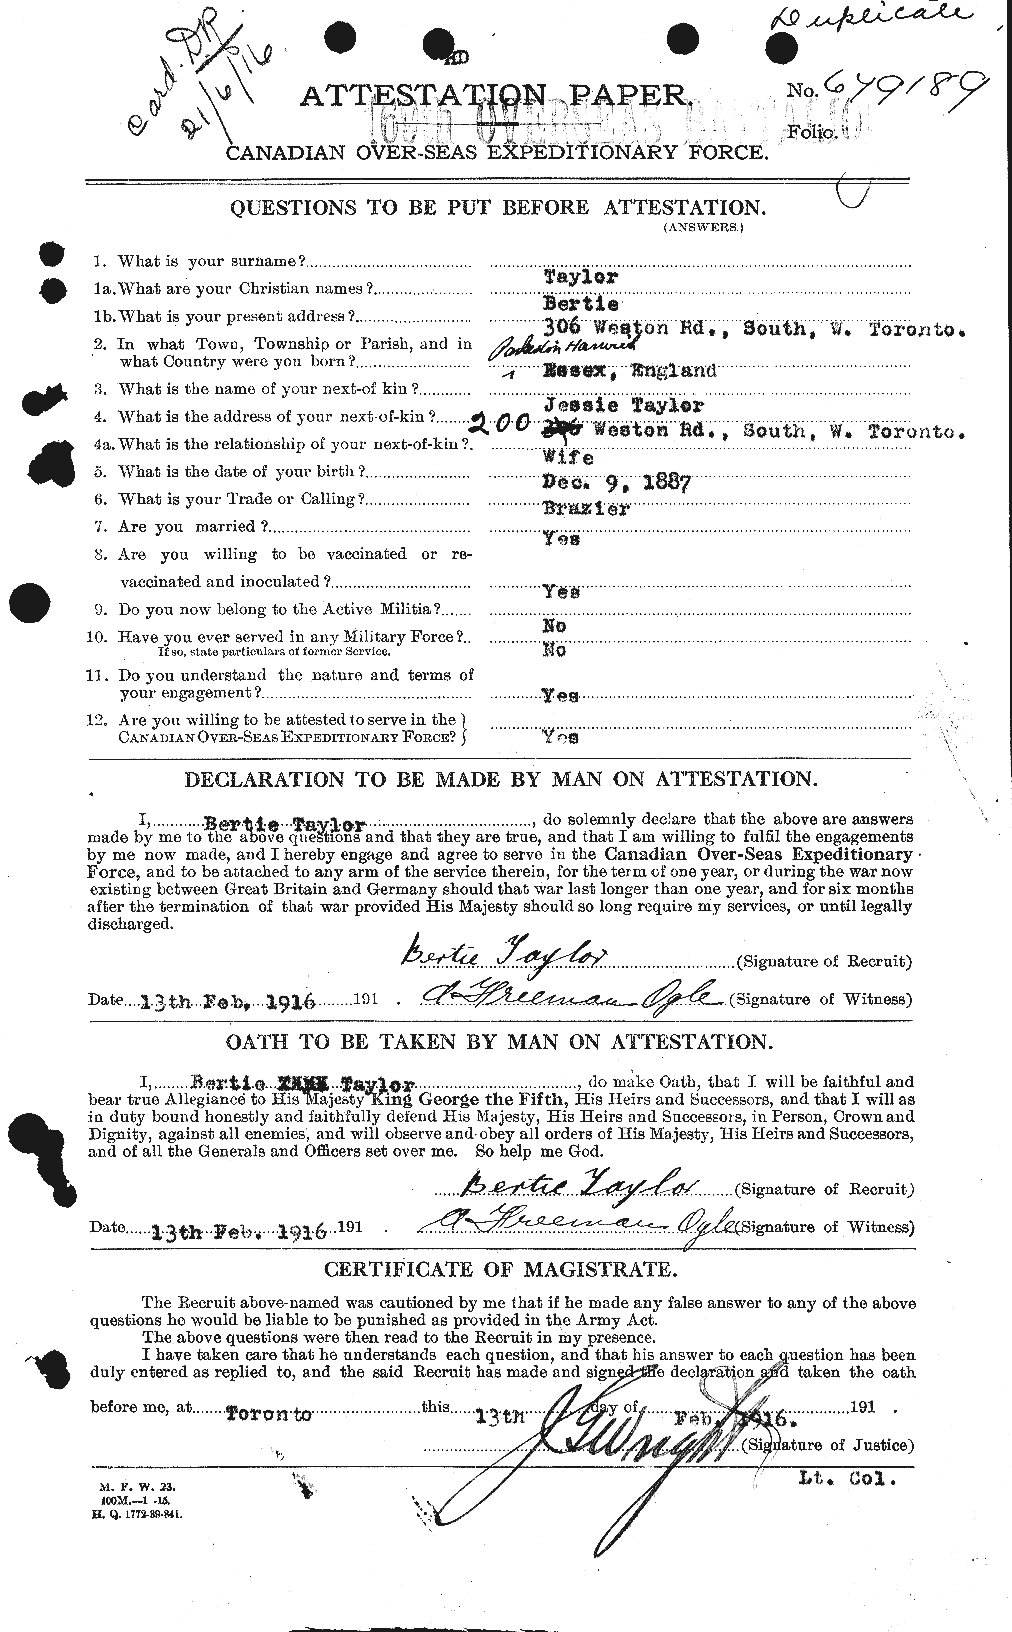 Personnel Records of the First World War - CEF 626768a